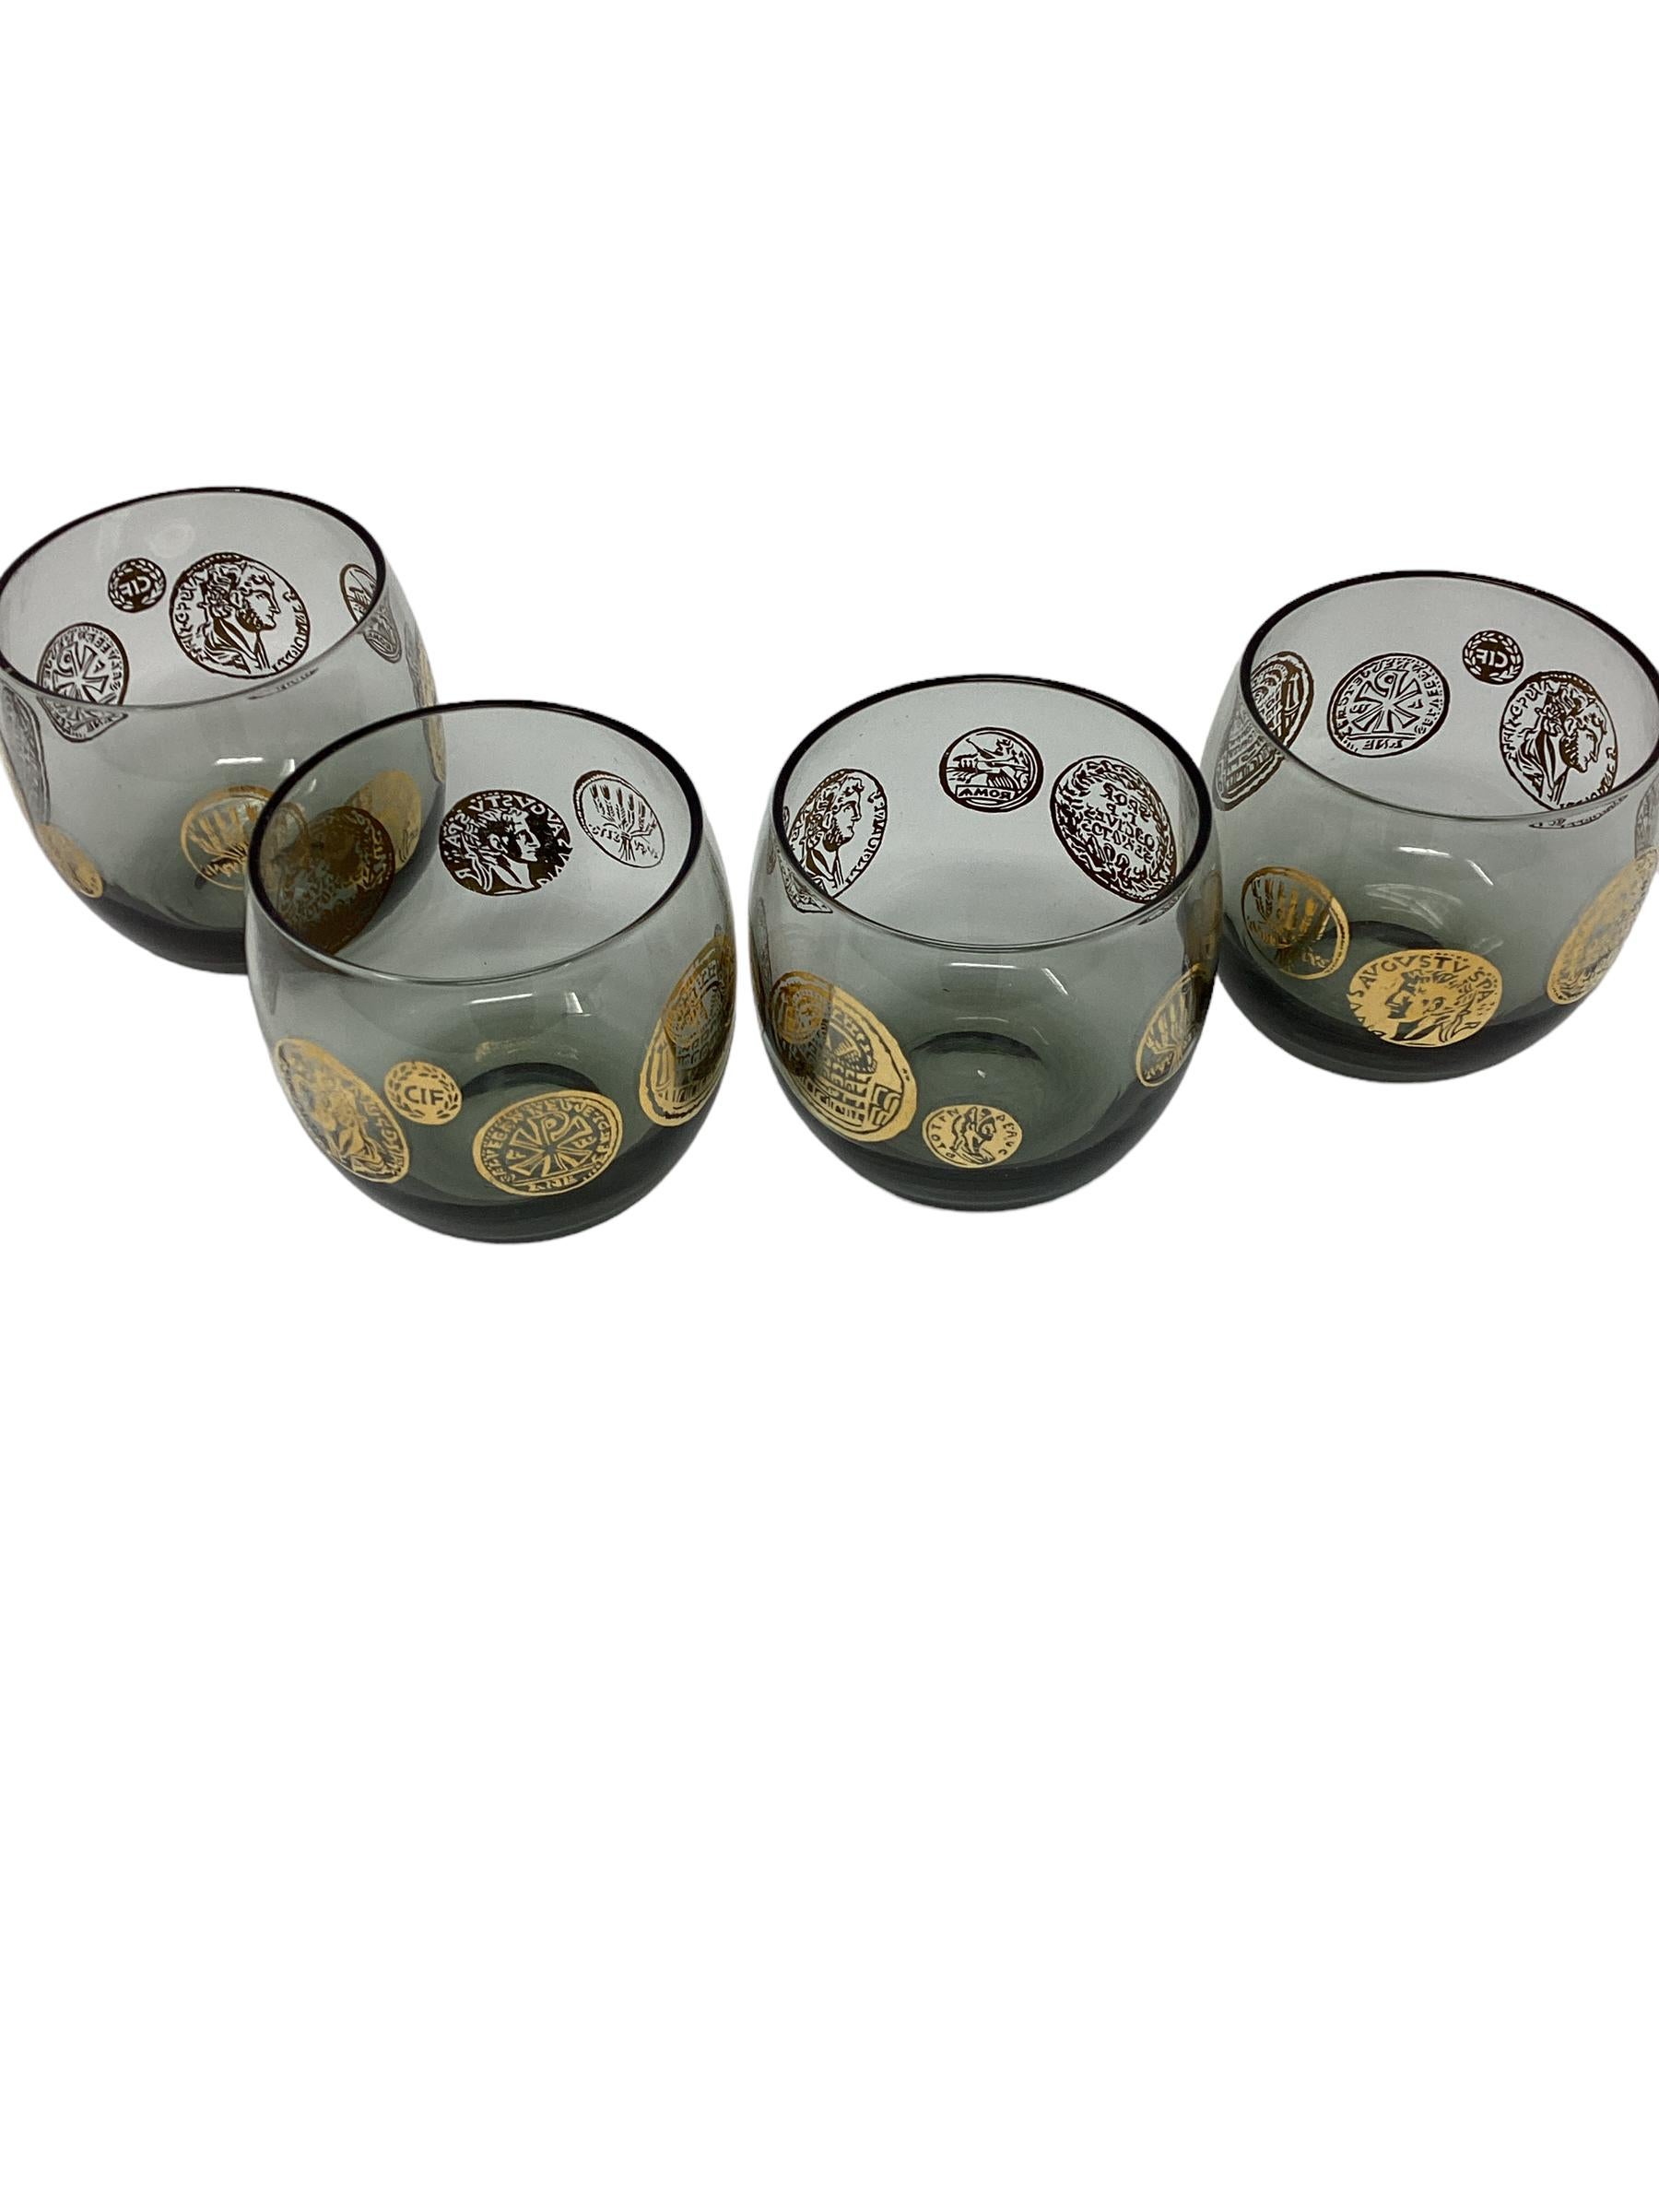 Set of 4 Smoke Roly Poly Cocktail Glasses with Roman Insignias. 2 Sets are available.